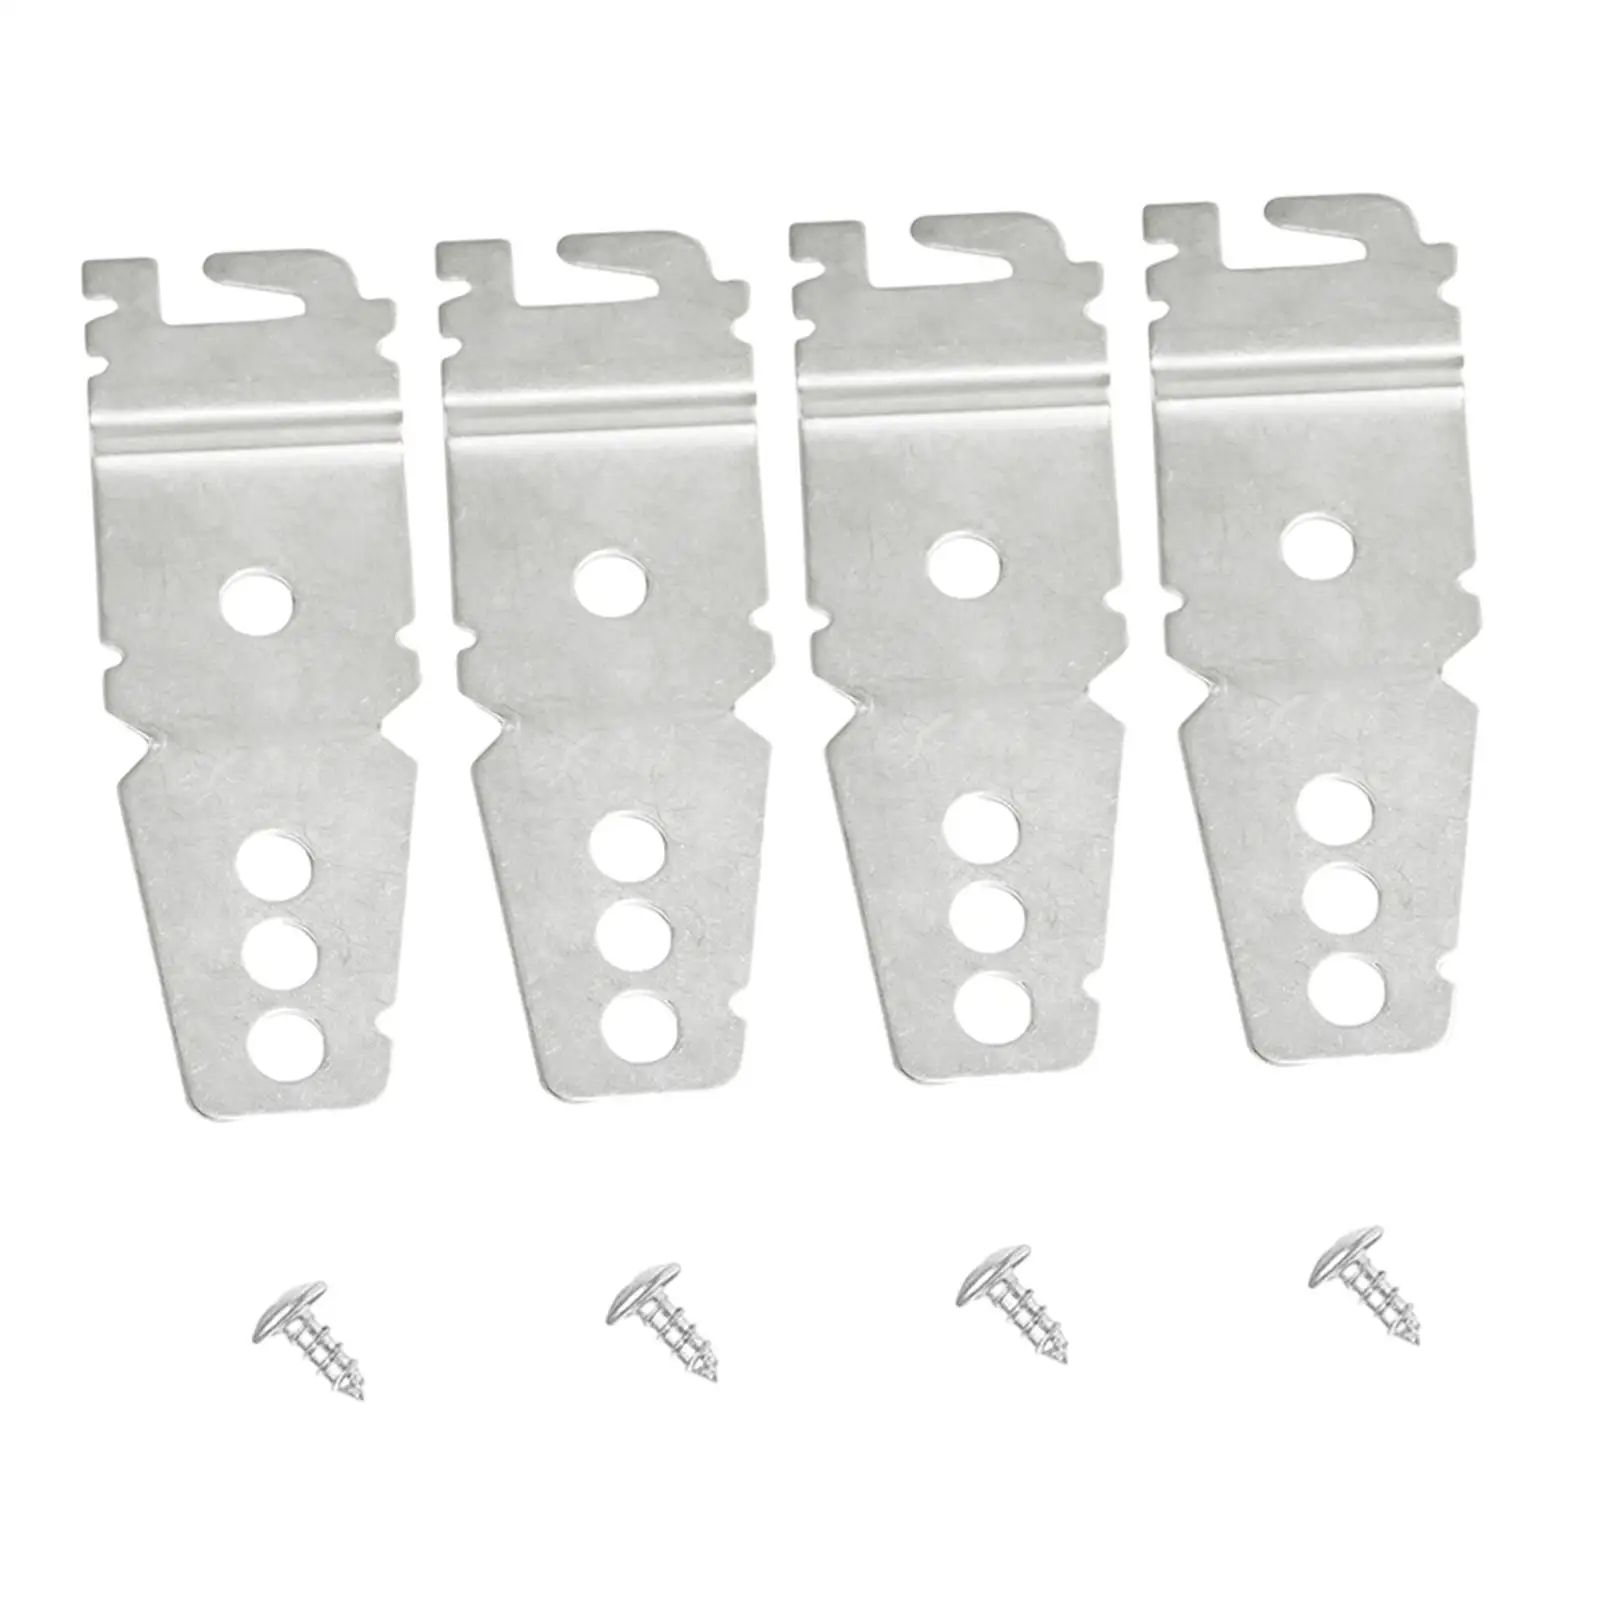 4x 8269145 Dishwasher Mounting Bracket Stable Performance Commercial Grade Accessory Rustproof for WP8269145 AP3039168 PS393134